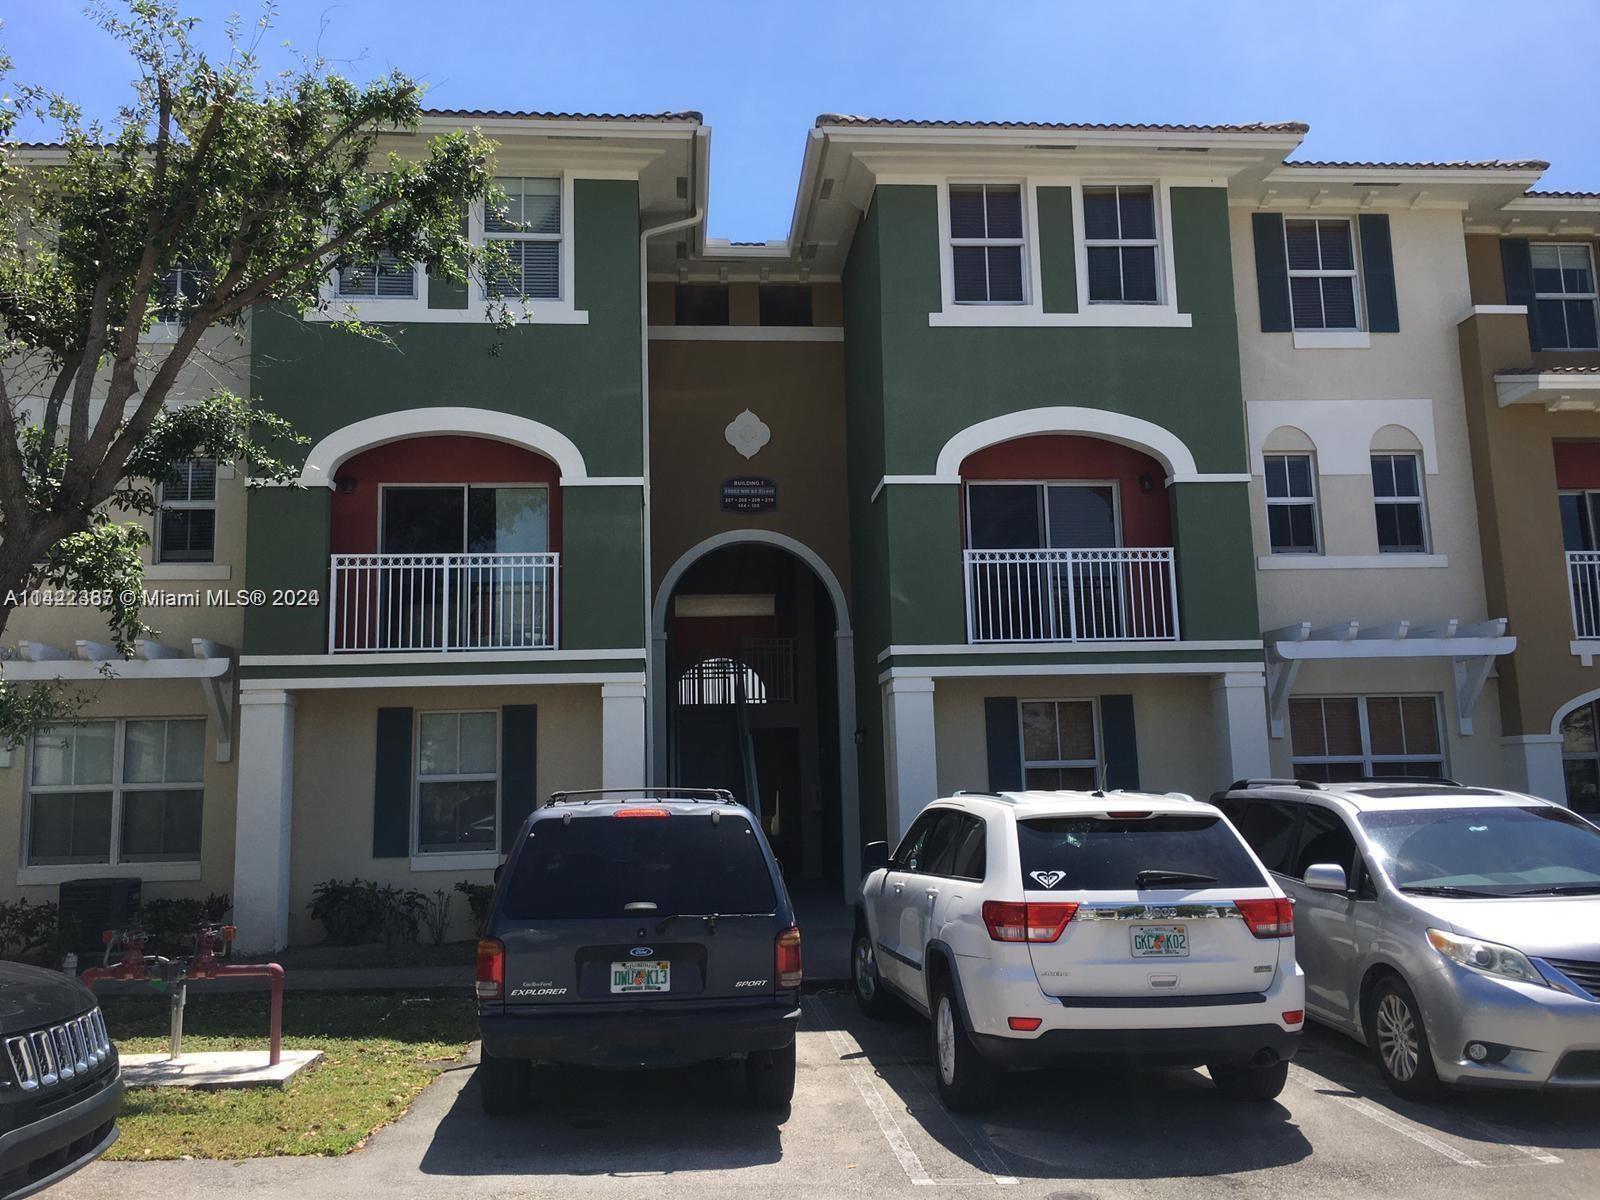 Photo of 10902 NW 83rd St #209 in Doral, FL